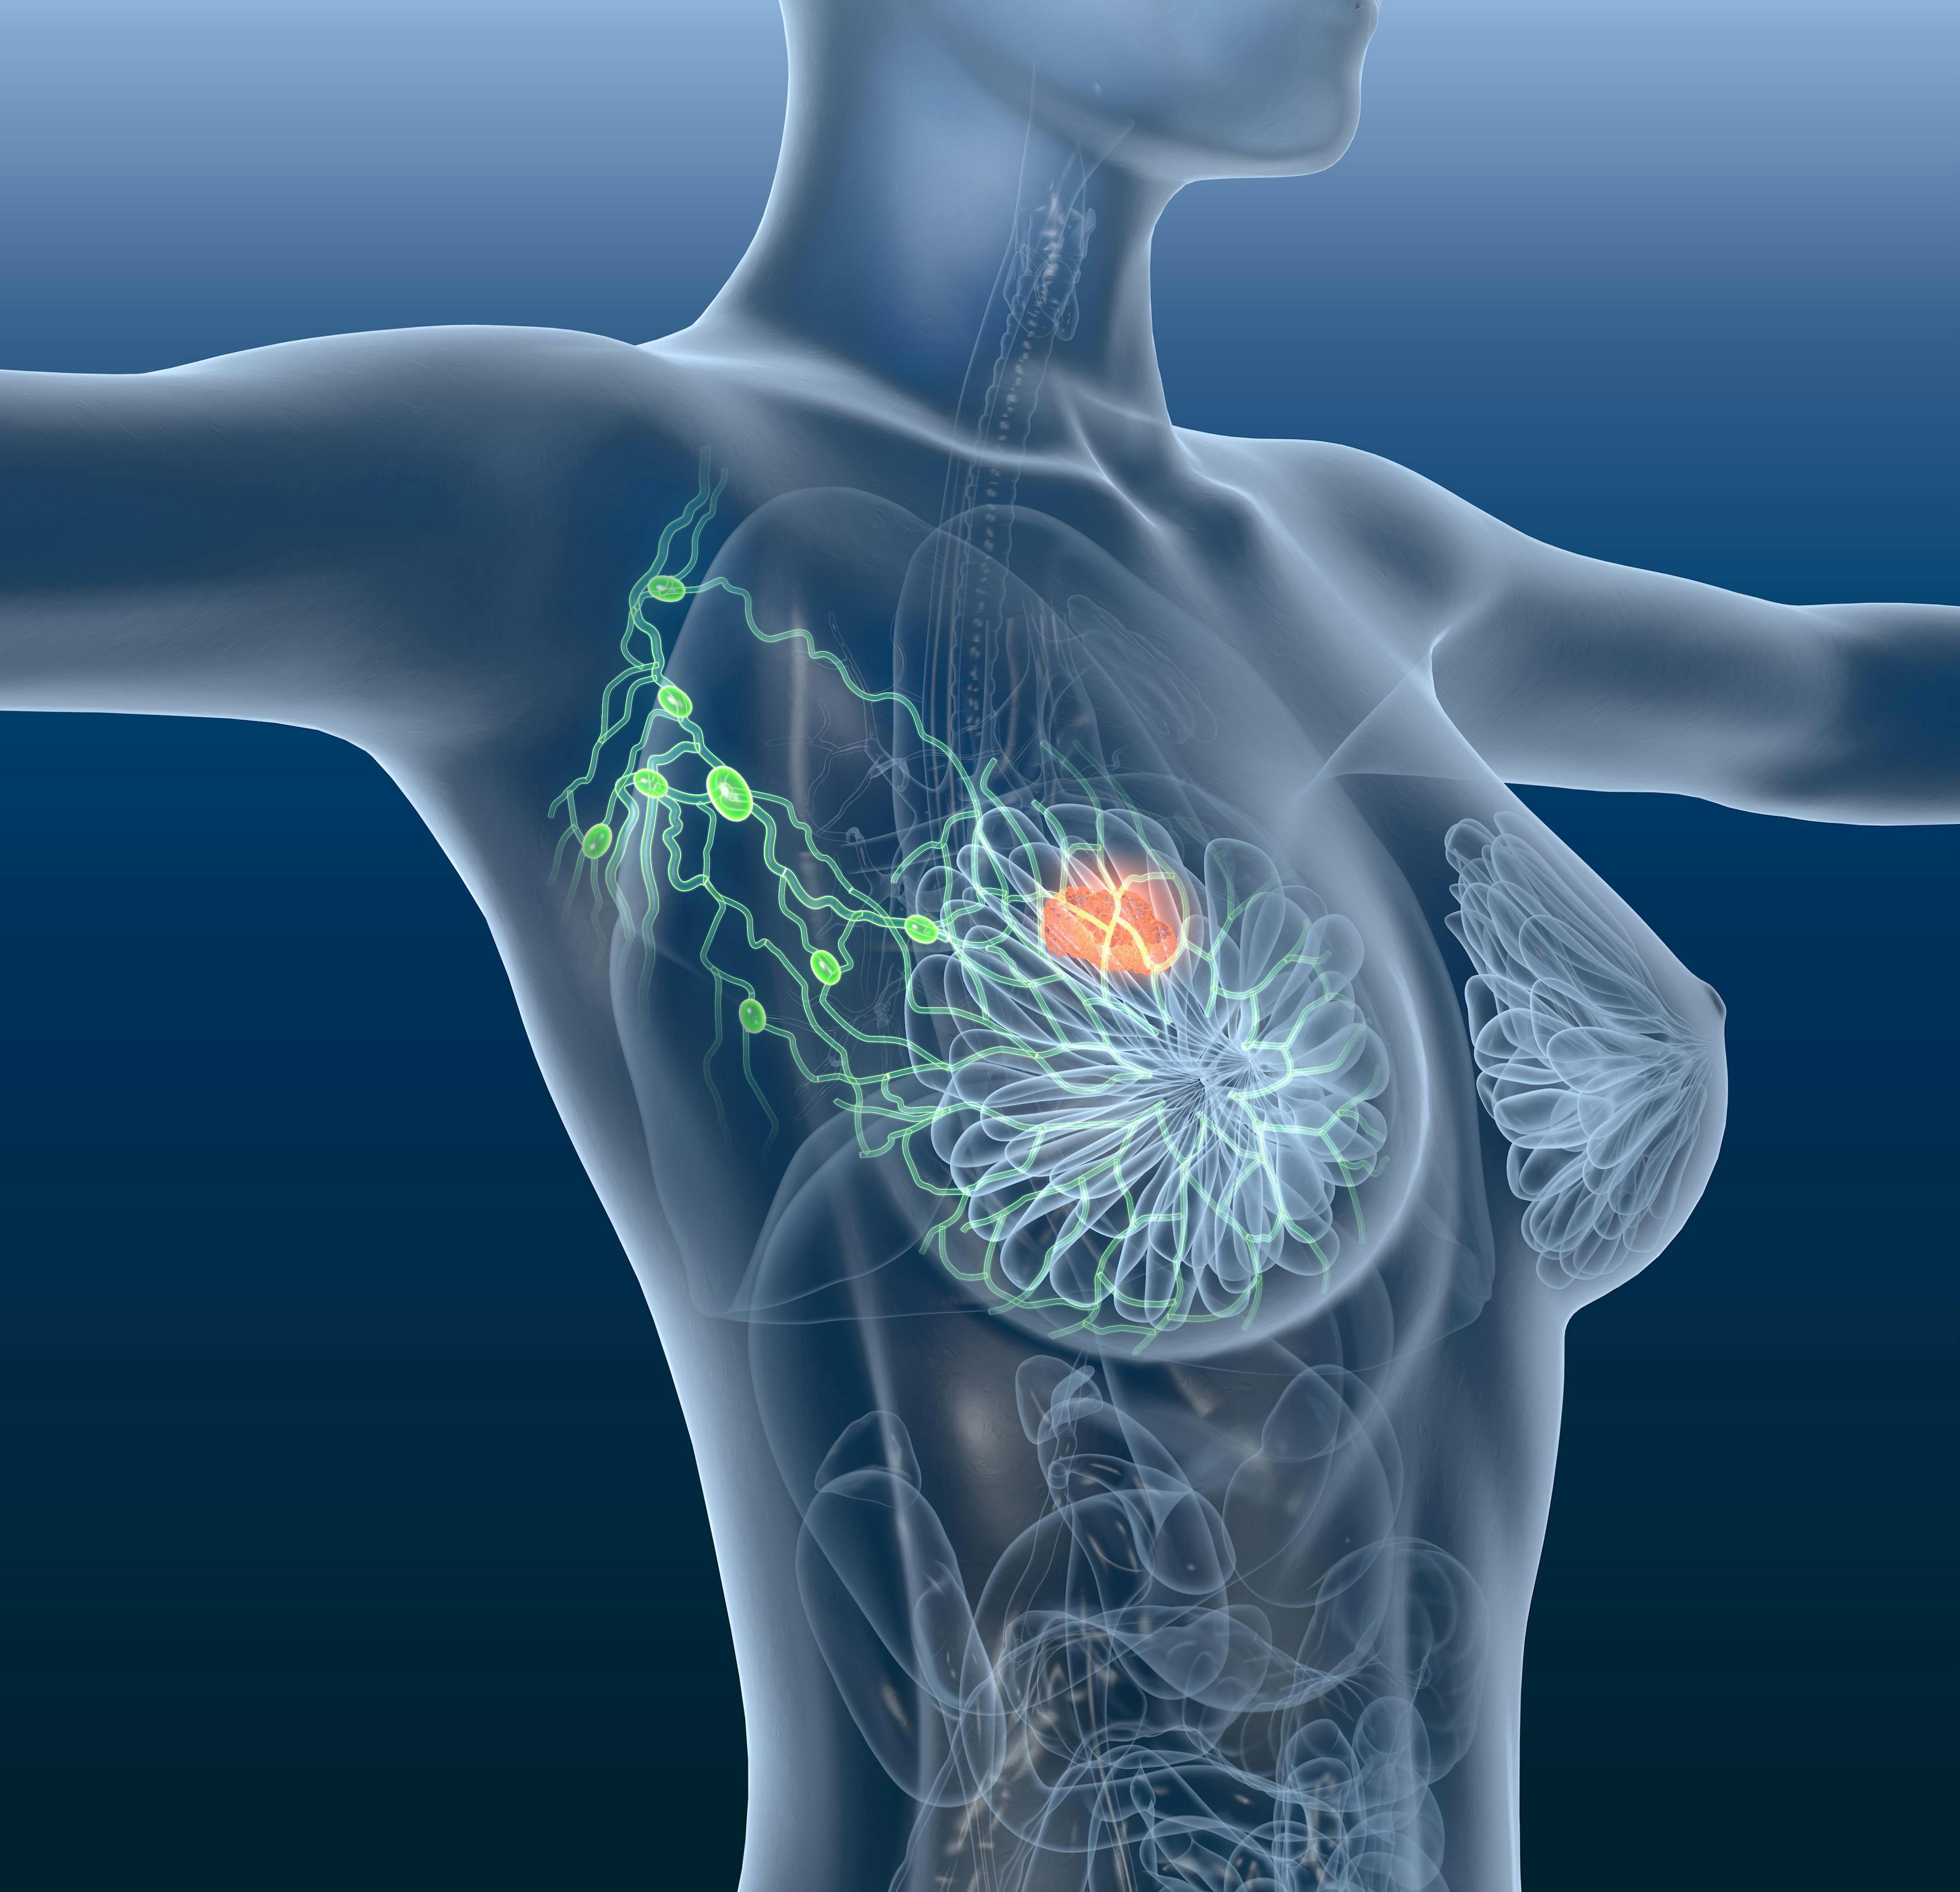 Study Identifies Cost-Effective Strategies for Neoadjuvant-Adjuvant Treatment of HER2-Positive Breast Cancer